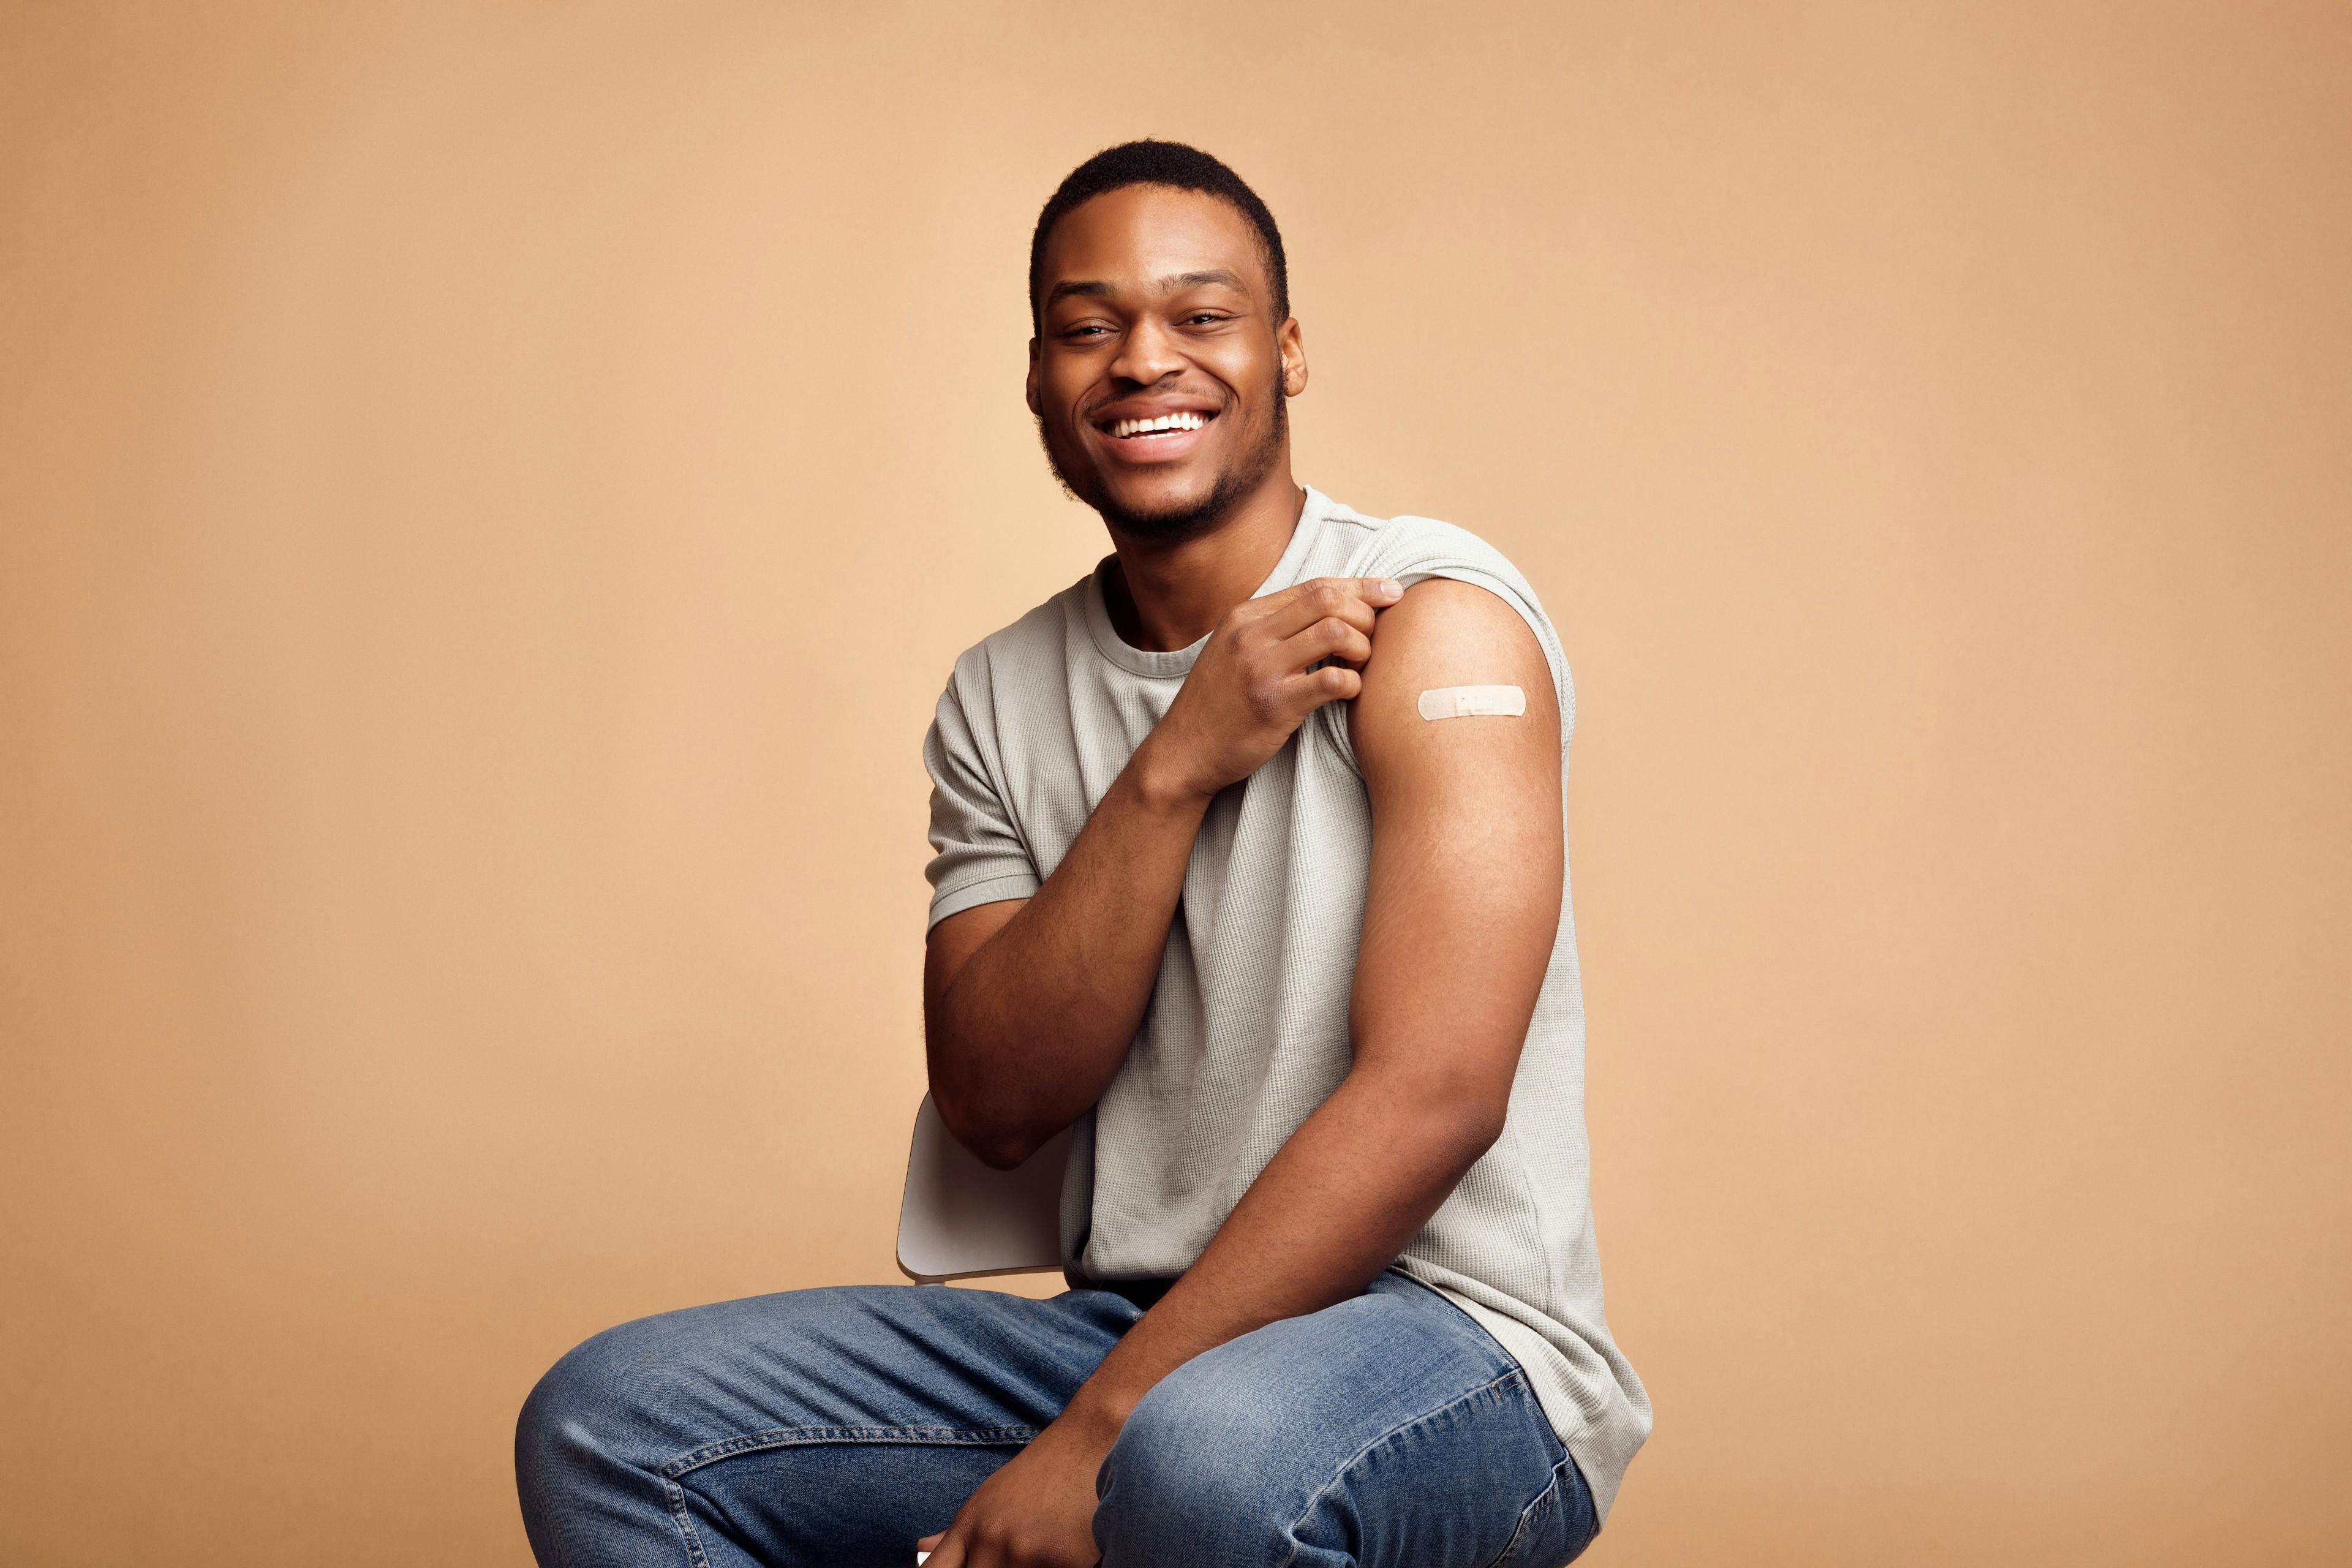 Man showing vaccinated arm with band-aid